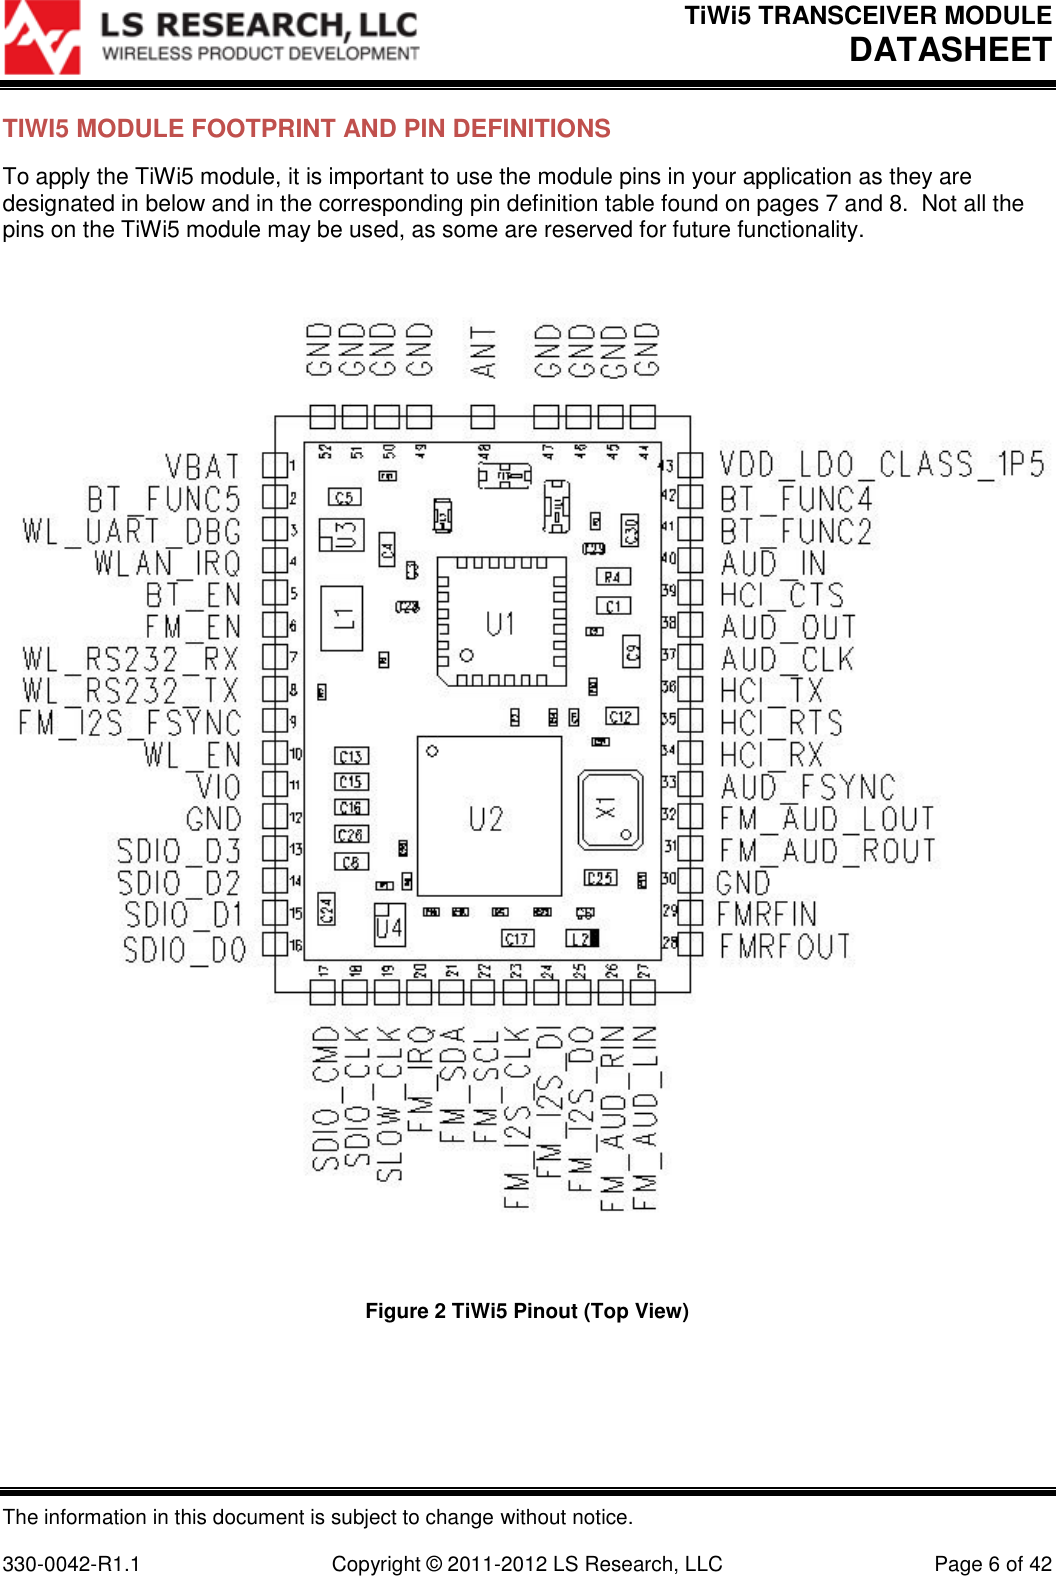 TiWi5 TRANSCEIVER MODULE DATASHEET  The information in this document is subject to change without notice.  330-0042-R1.1    Copyright © 2011-2012 LS Research, LLC  Page 6 of 42 TIWI5 MODULE FOOTPRINT AND PIN DEFINITIONS To apply the TiWi5 module, it is important to use the module pins in your application as they are designated in below and in the corresponding pin definition table found on pages 7 and 8.  Not all the pins on the TiWi5 module may be used, as some are reserved for future functionality.    Figure 2 TiWi5 Pinout (Top View) 